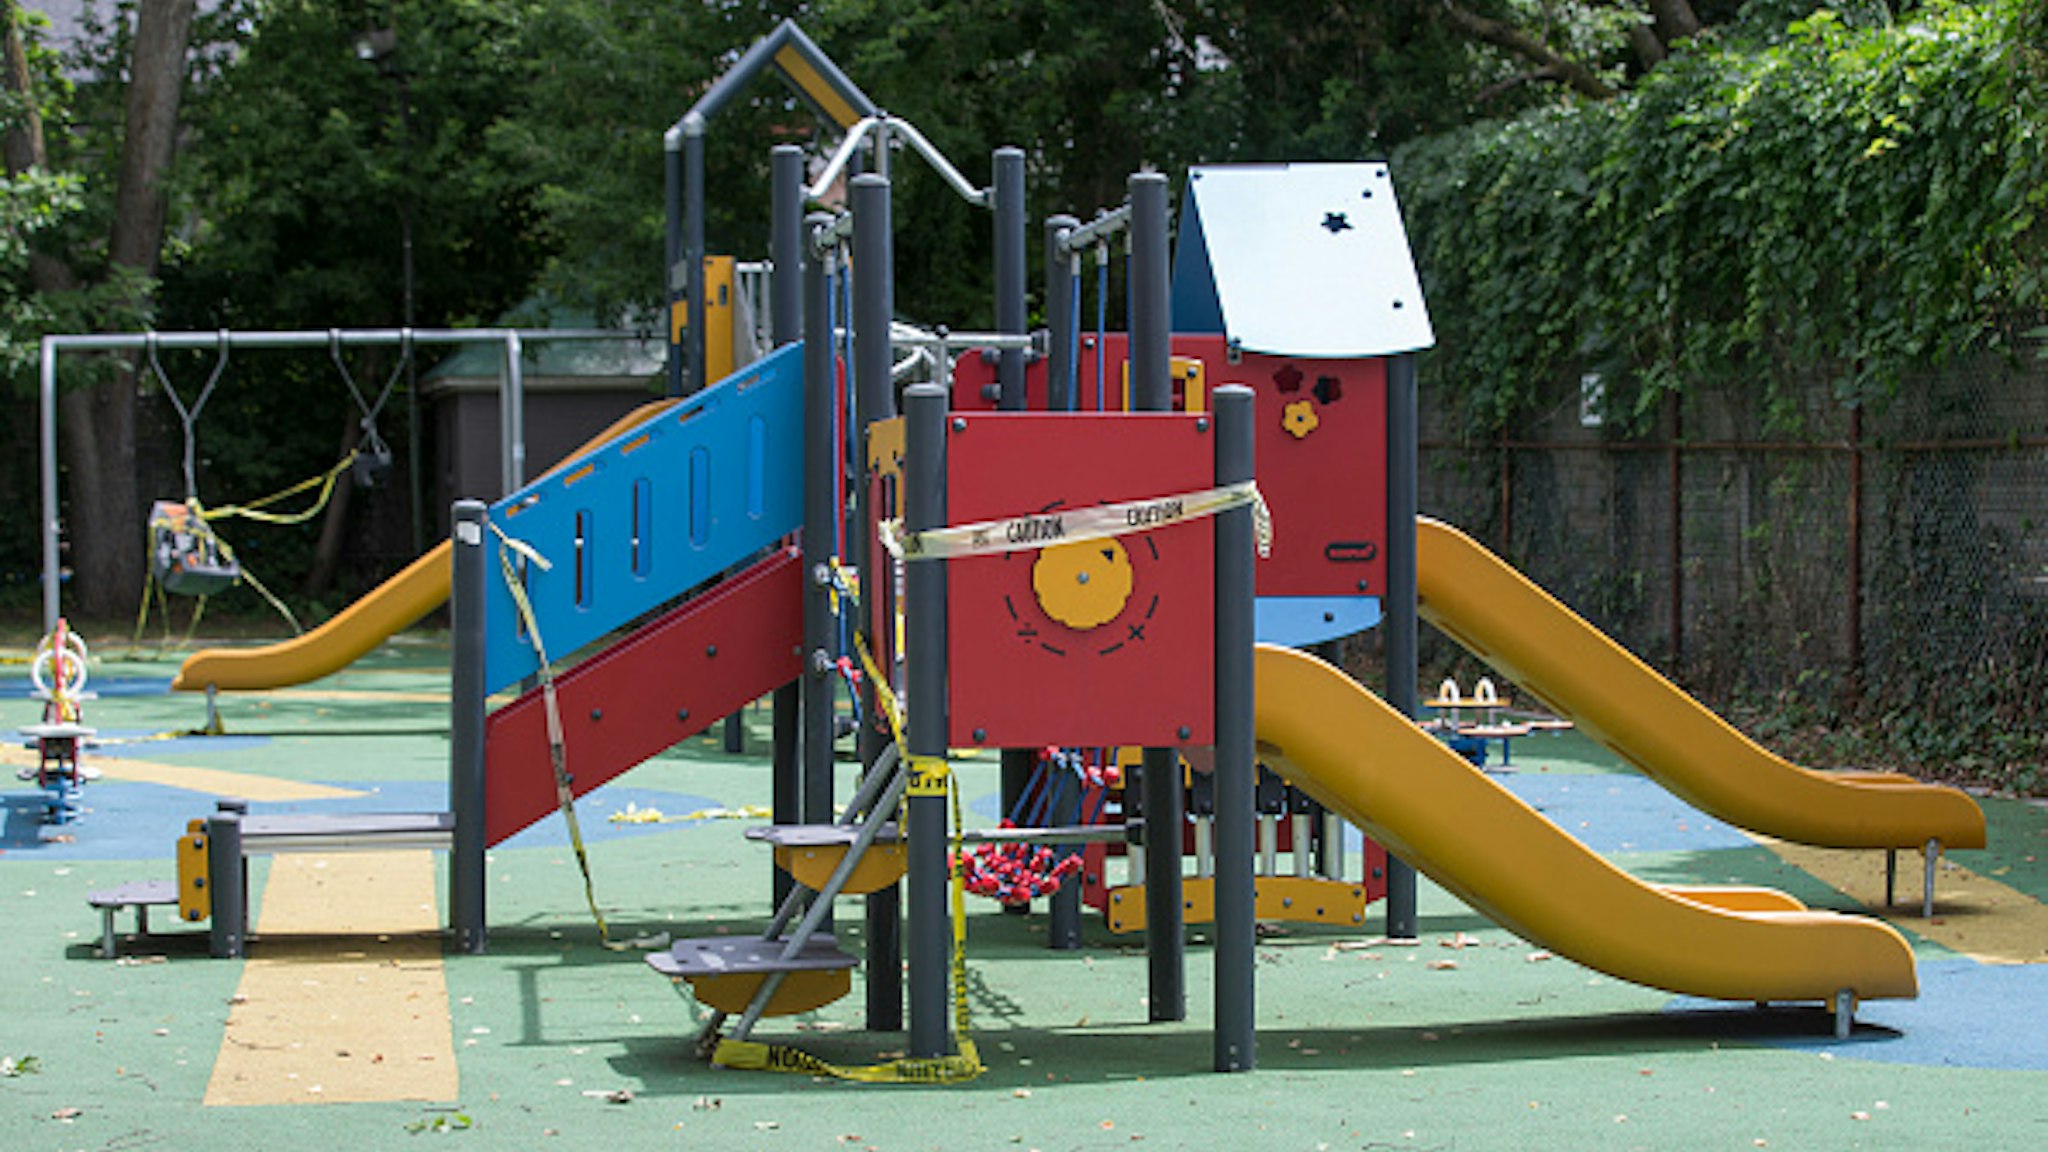 TORONTO, ON - JULY 13: Much of the tape on the play equipment at Cathraw Playground, in midtown, is in disarray and may need to be restrung now that it is clear childrens playgrounds will remain closed during Phase 3 of the reopening. COVID-19. CORONAPD Toronto Star/Rick Madonik